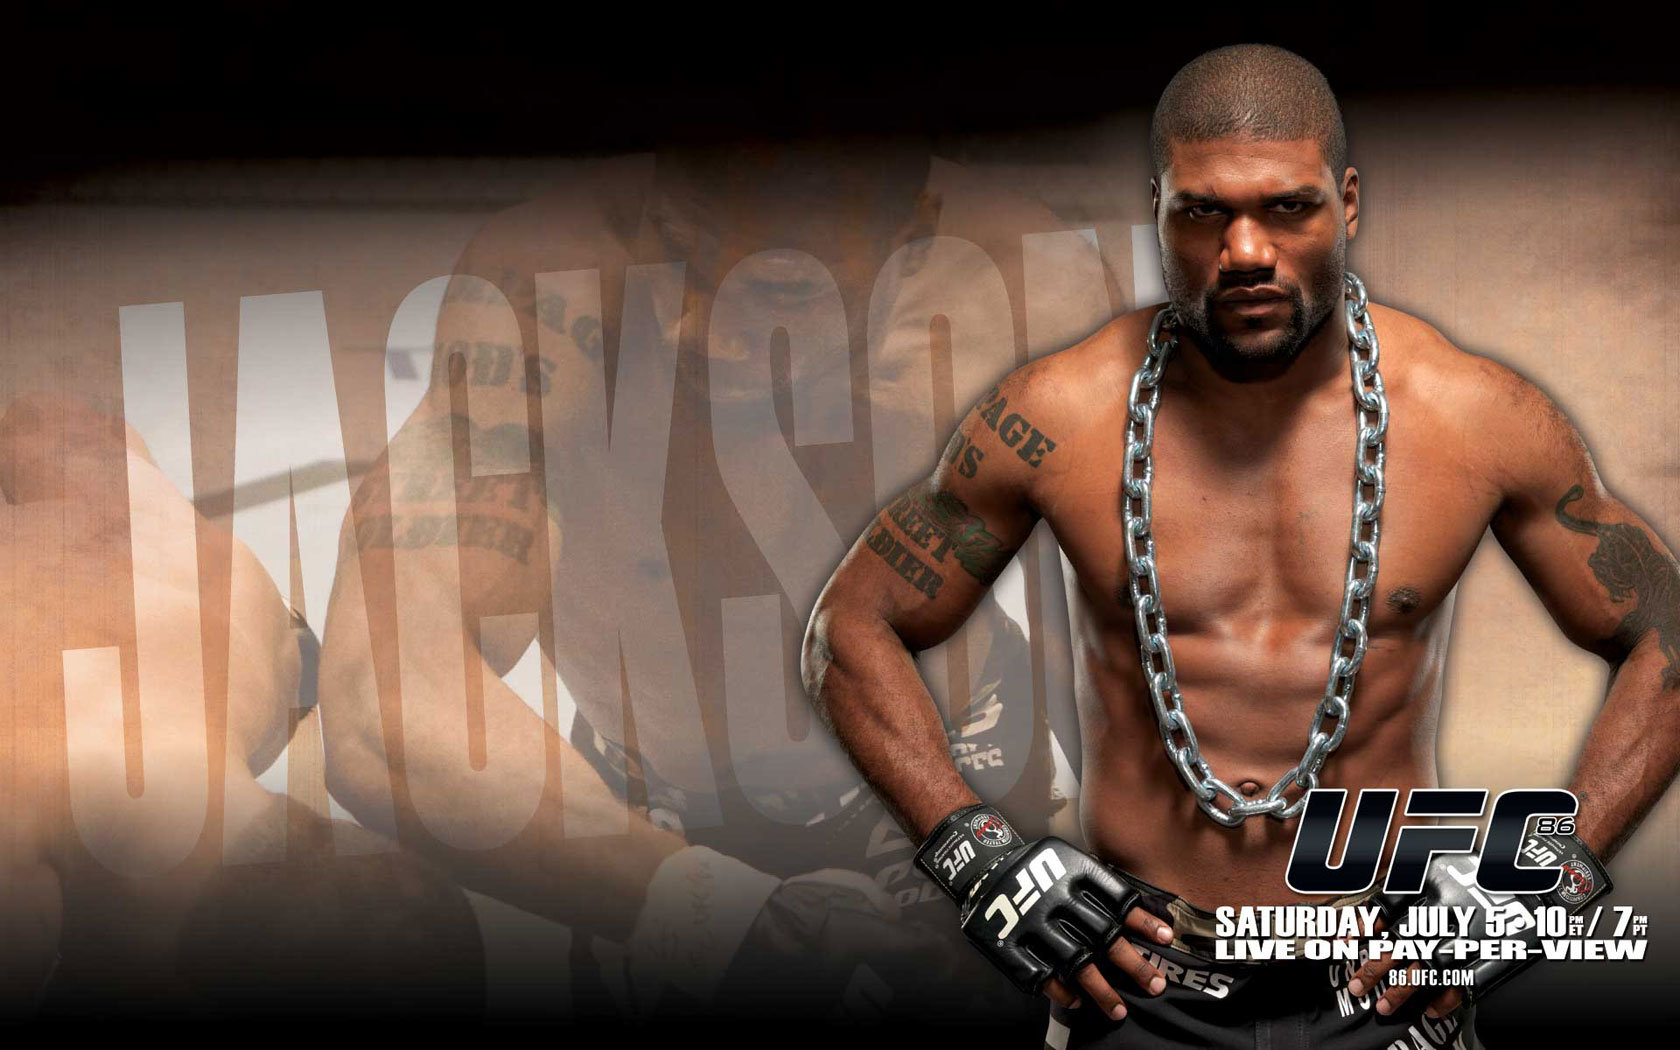 Download Ufc 4 wallpapers for mobile phone free Ufc 4 HD pictures